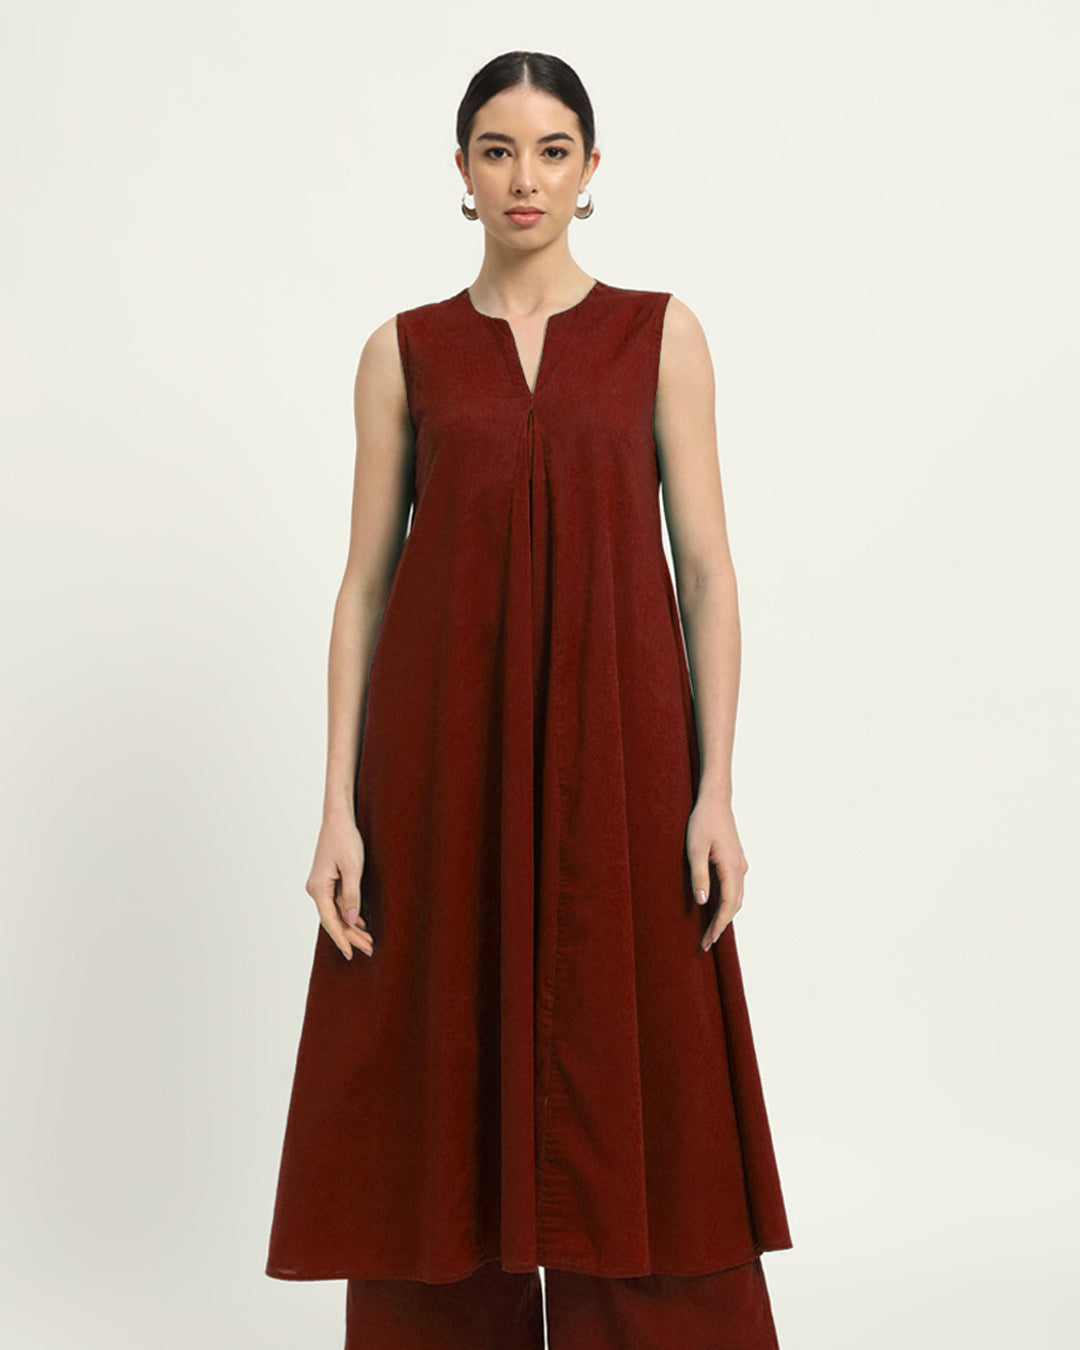 Russet Red Graceful Grove Kurta (Without Bottoms)